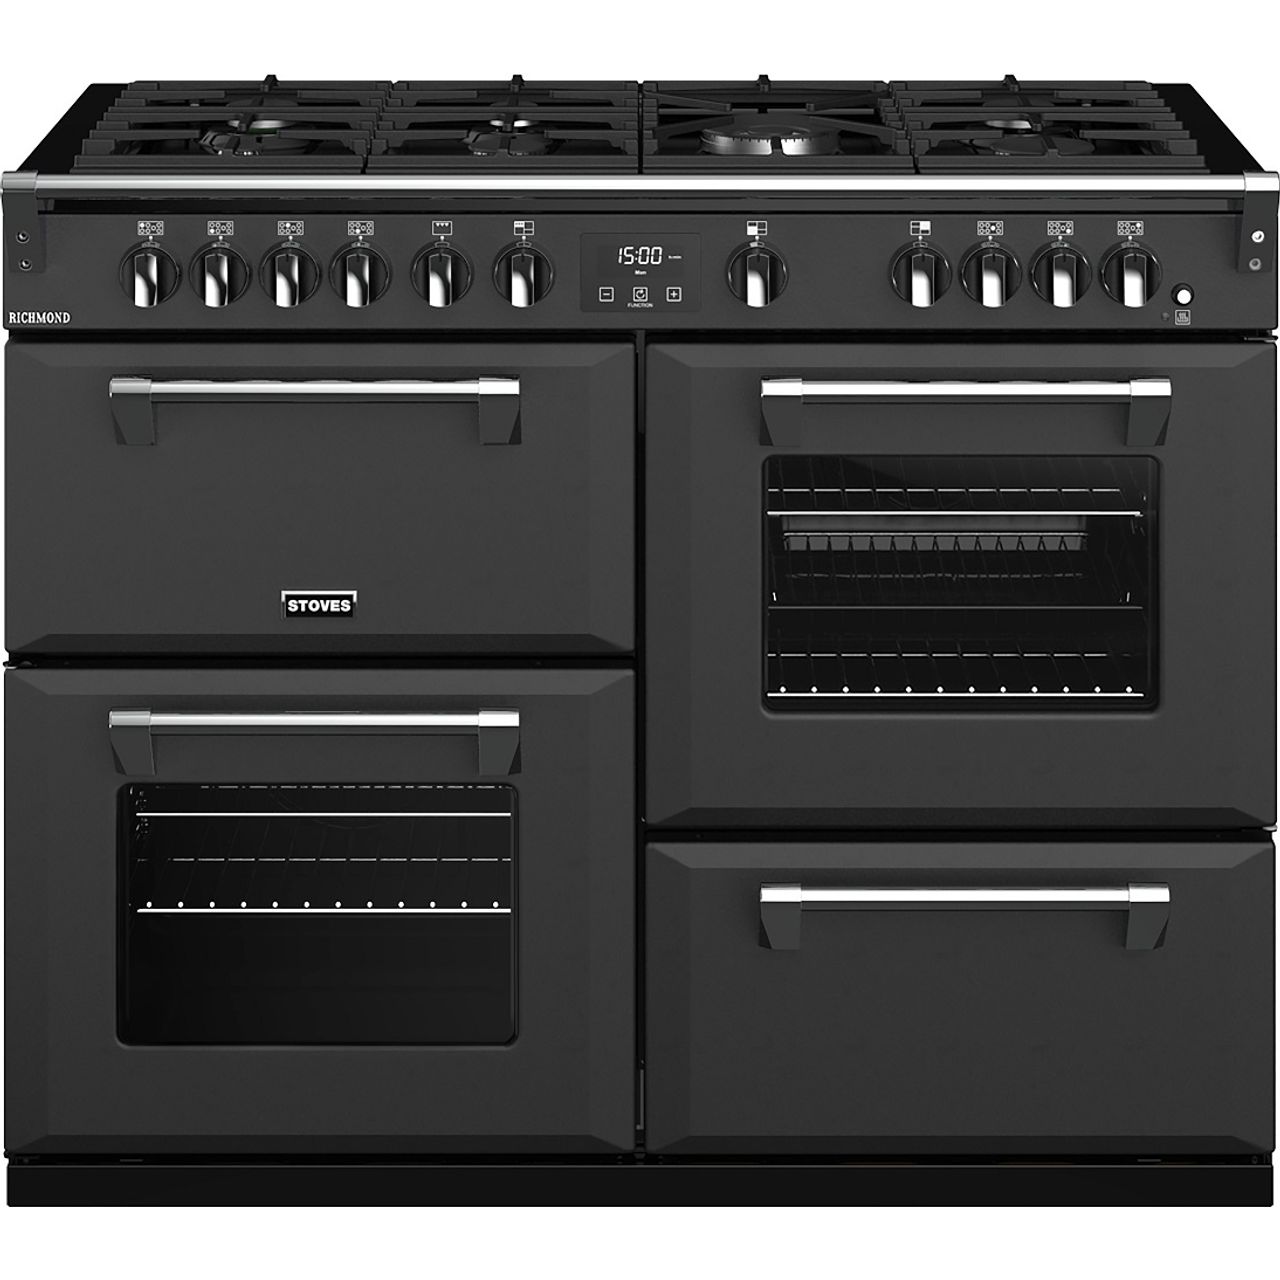 Stoves Richmond S1100G 110cm Gas Range Cooker with Electric Grill Review